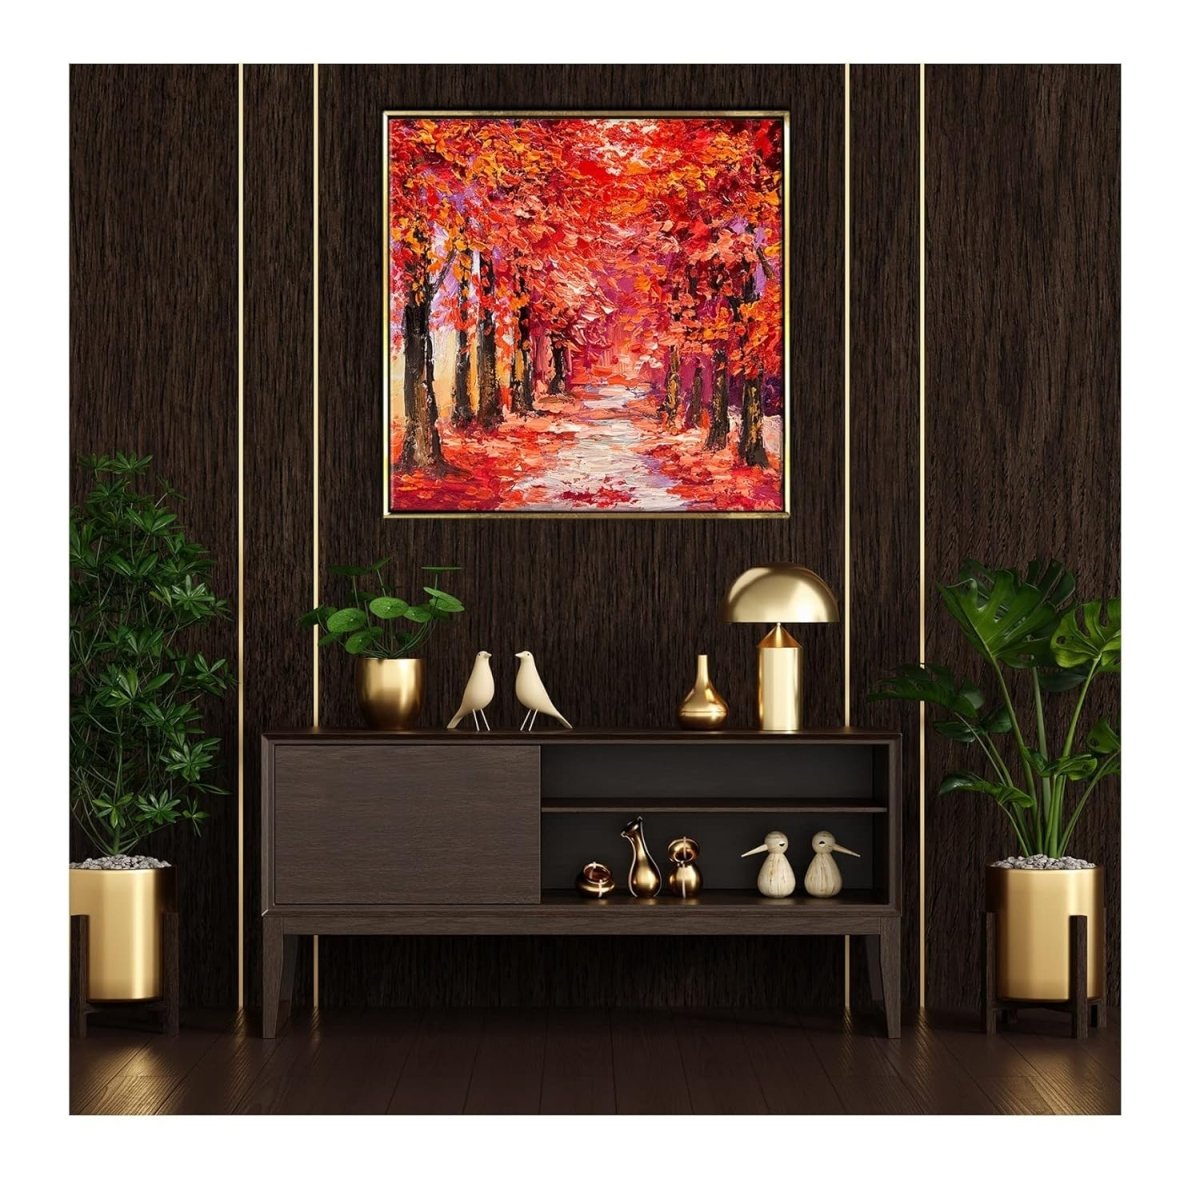 The Ember Lane Autumn Canvas Wall Art (24 x 24 Inches)